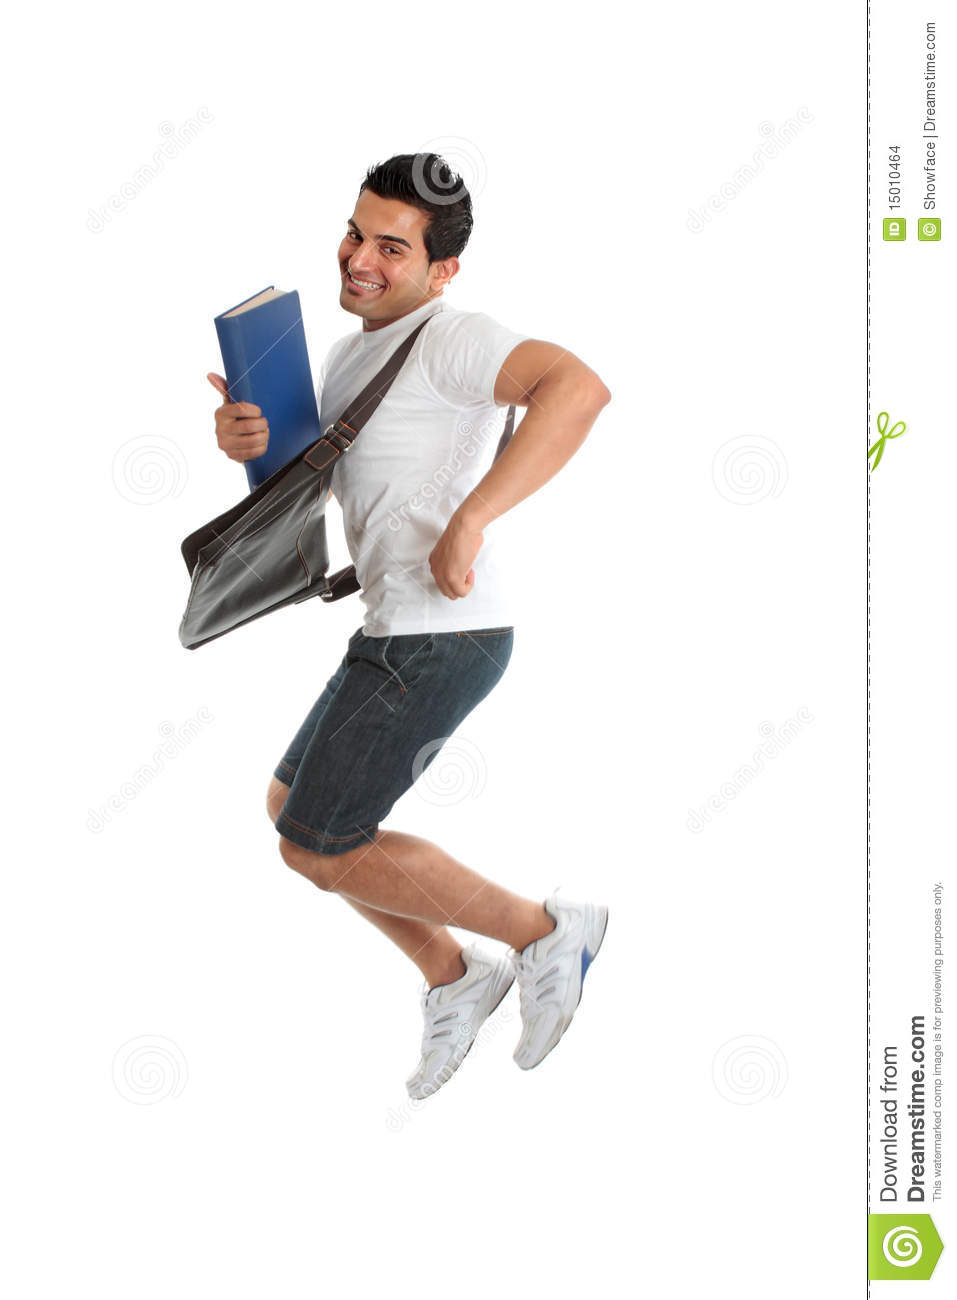 Happy Thrilled Excited University Or College Student Jumping Into